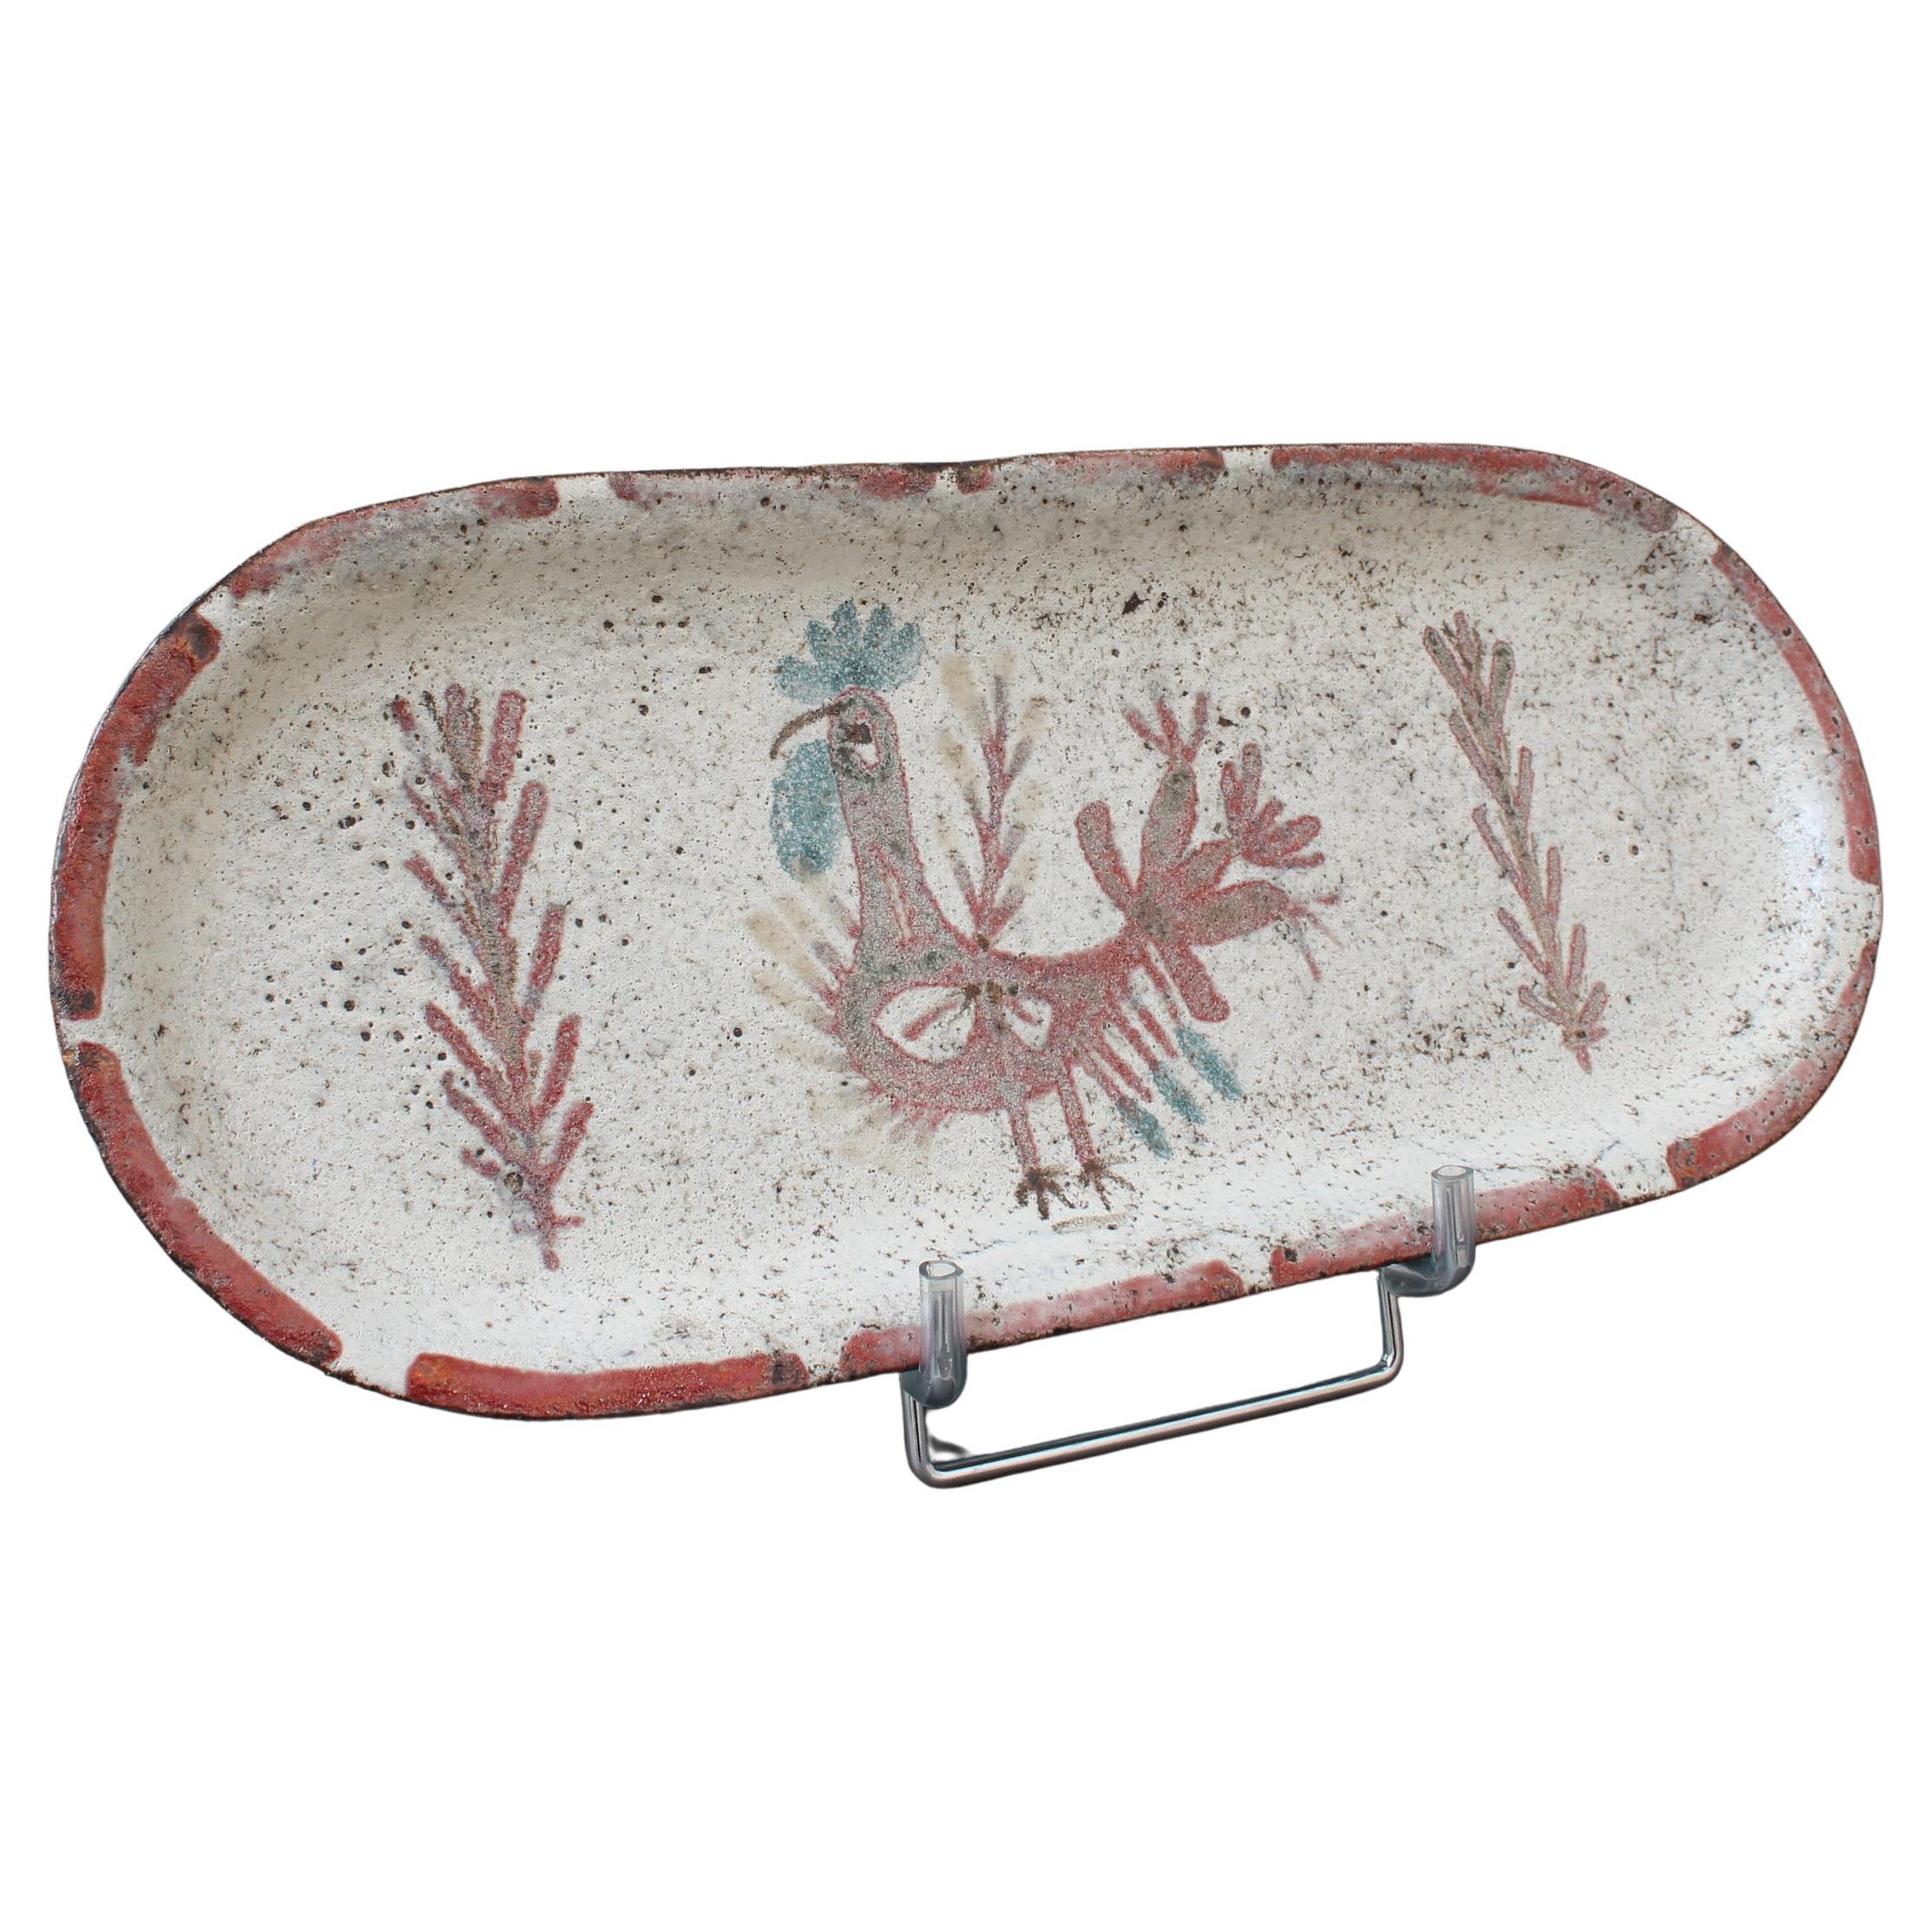 Mid-century French ceramic tray by for Le Mûrier (circa 1960s). Long-shaped tray with raised rim and rounded ends in rustic earthenware and decor of a French coq motif flanked by Reynaud's stylised foliage. The rooster is in the muted, mesmerising